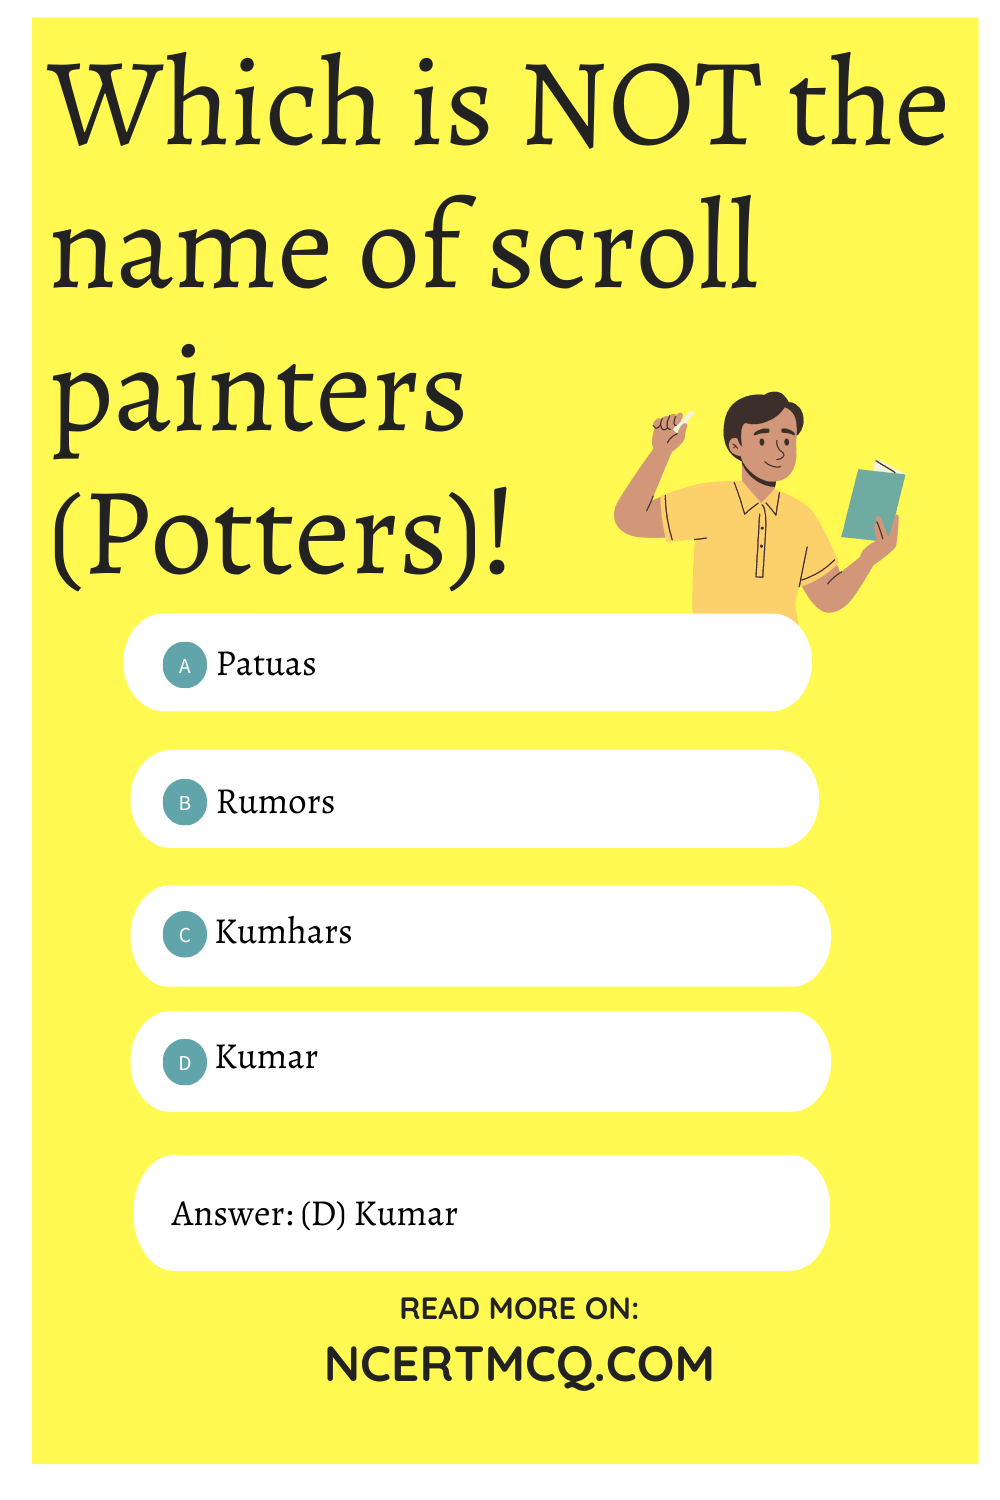 Which is NOT the name of scroll painters (Potters)!